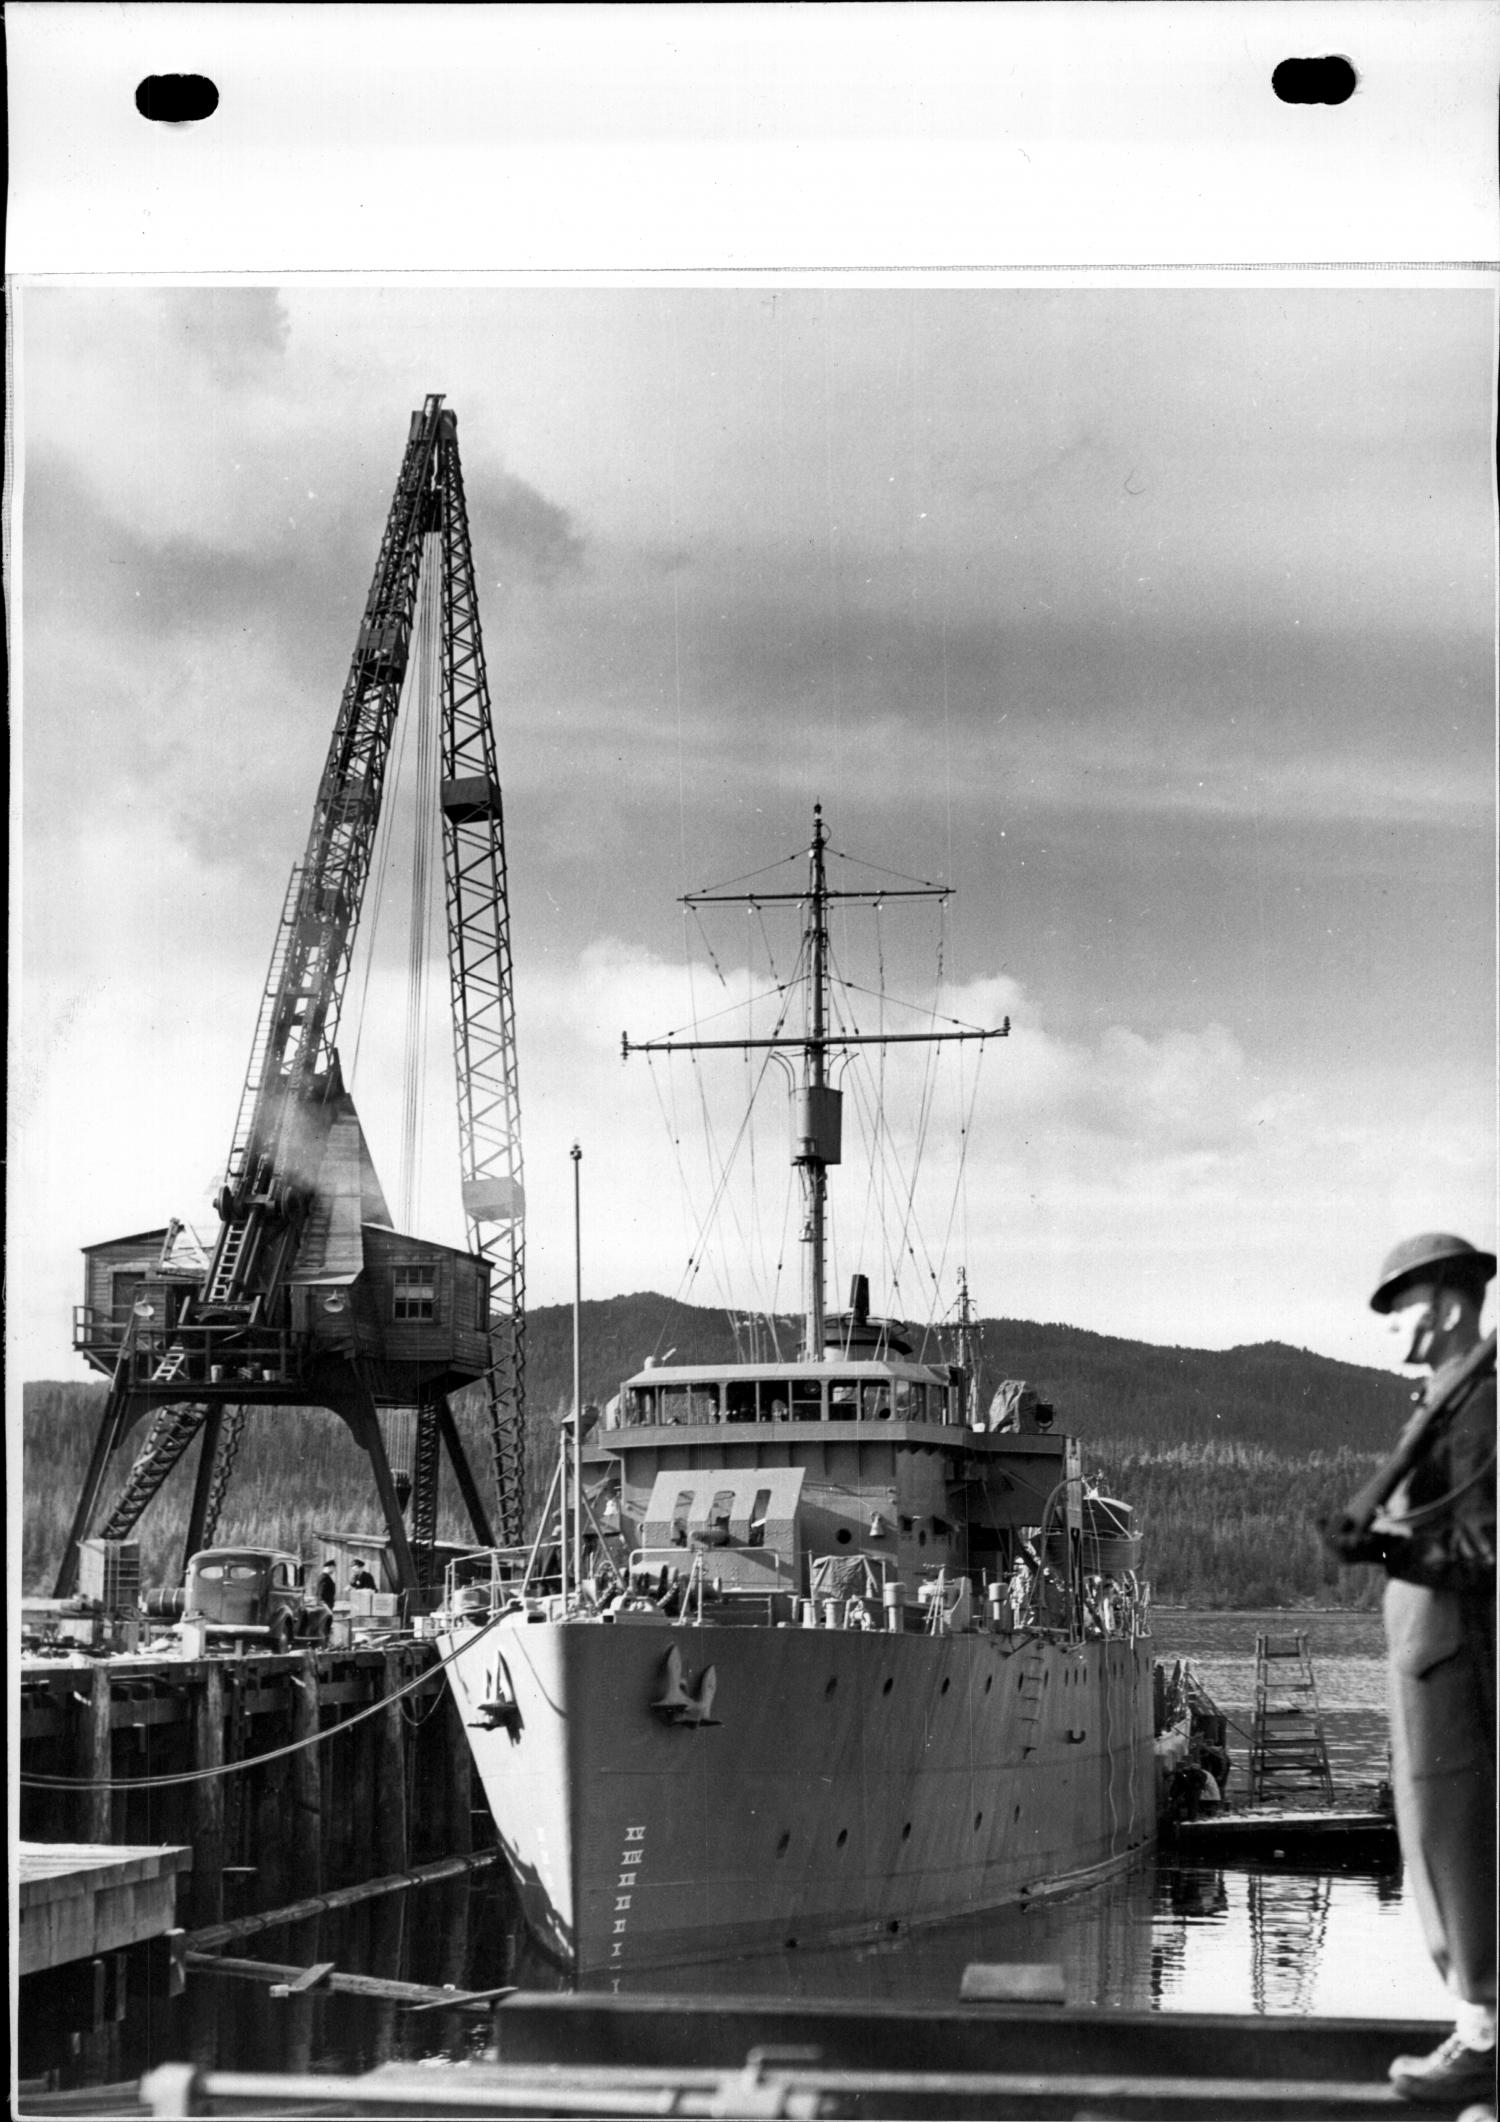 Newly constructed naval vessel at Prince Rupert’s drydock in 1942.